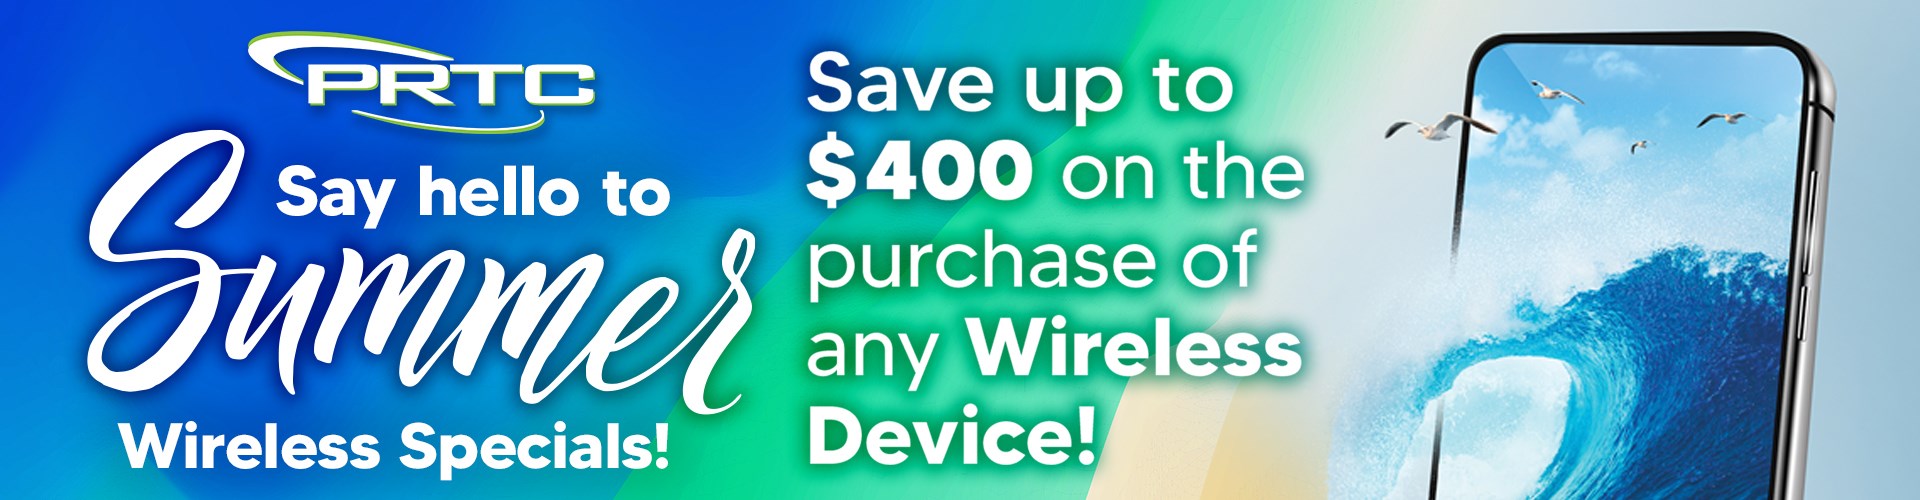 Say hello to Summer Wireless Specials!